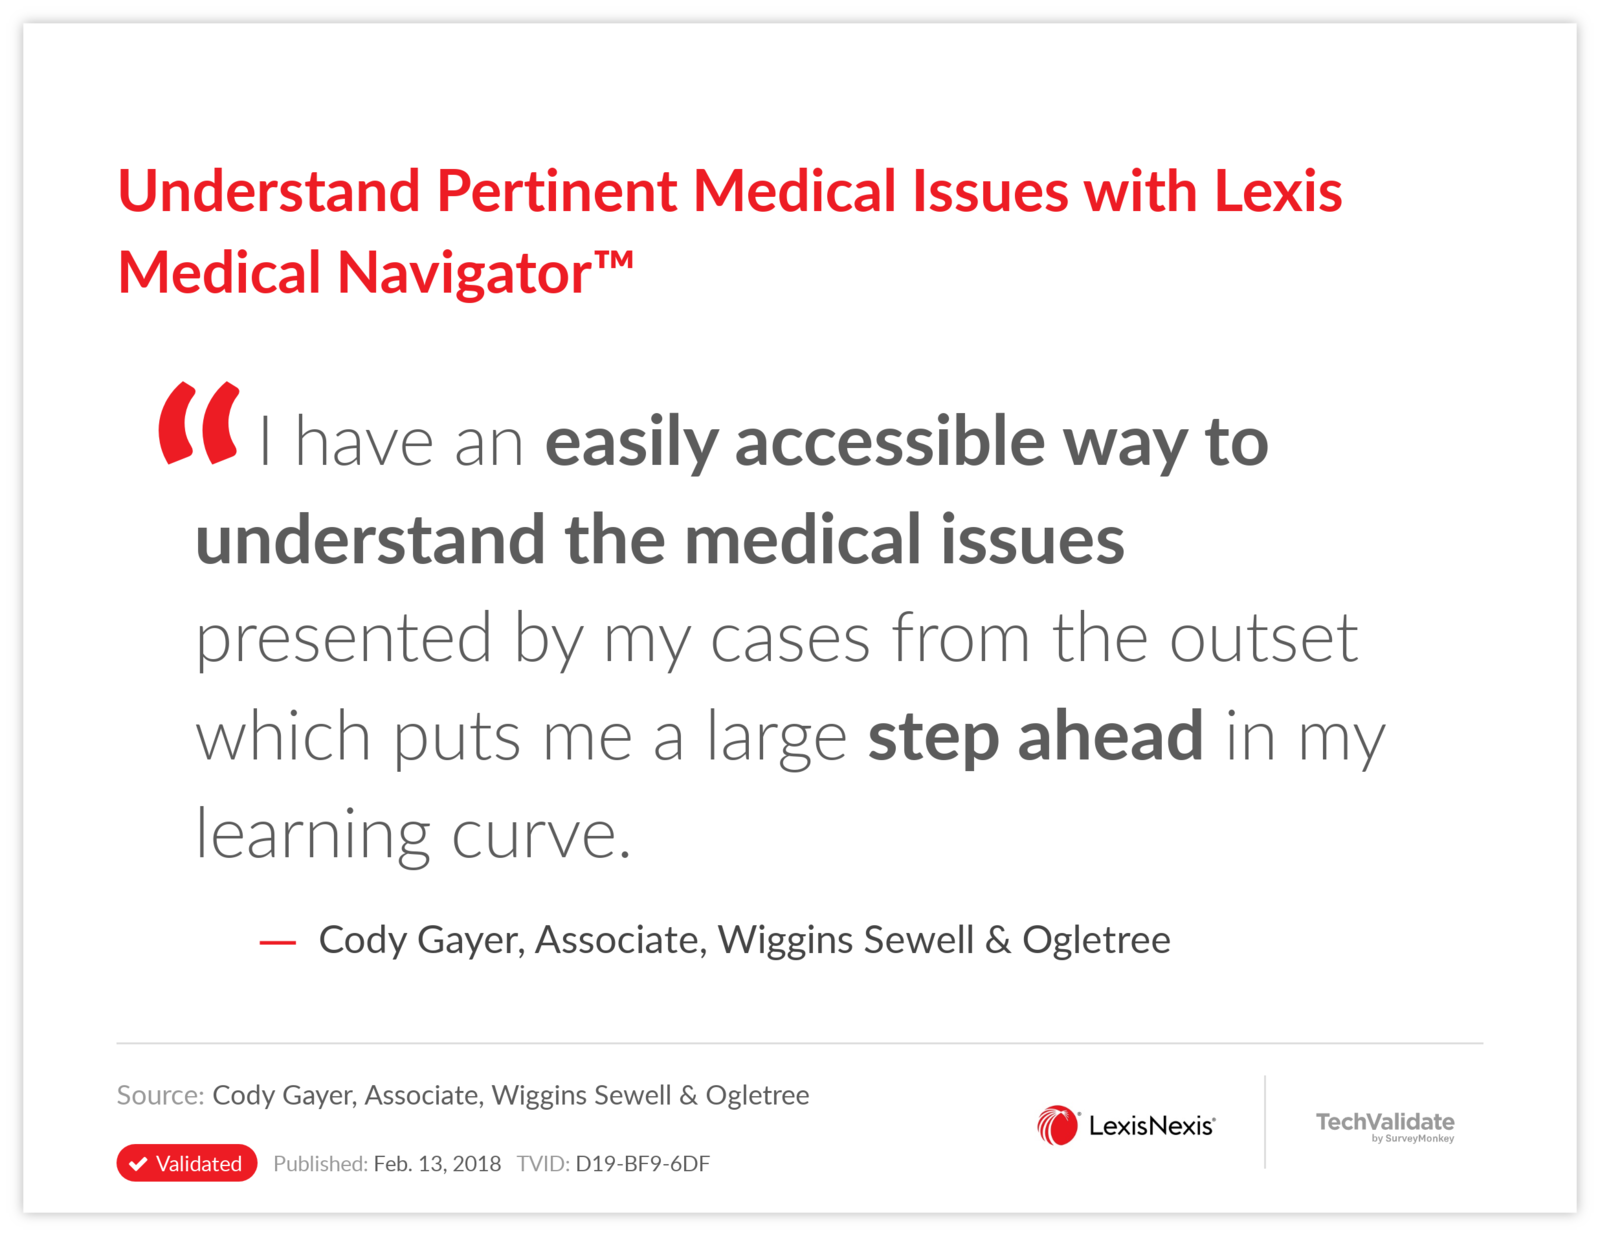 Understand Pertinent Medical Issues with Lexis Medical Navigator(TM)